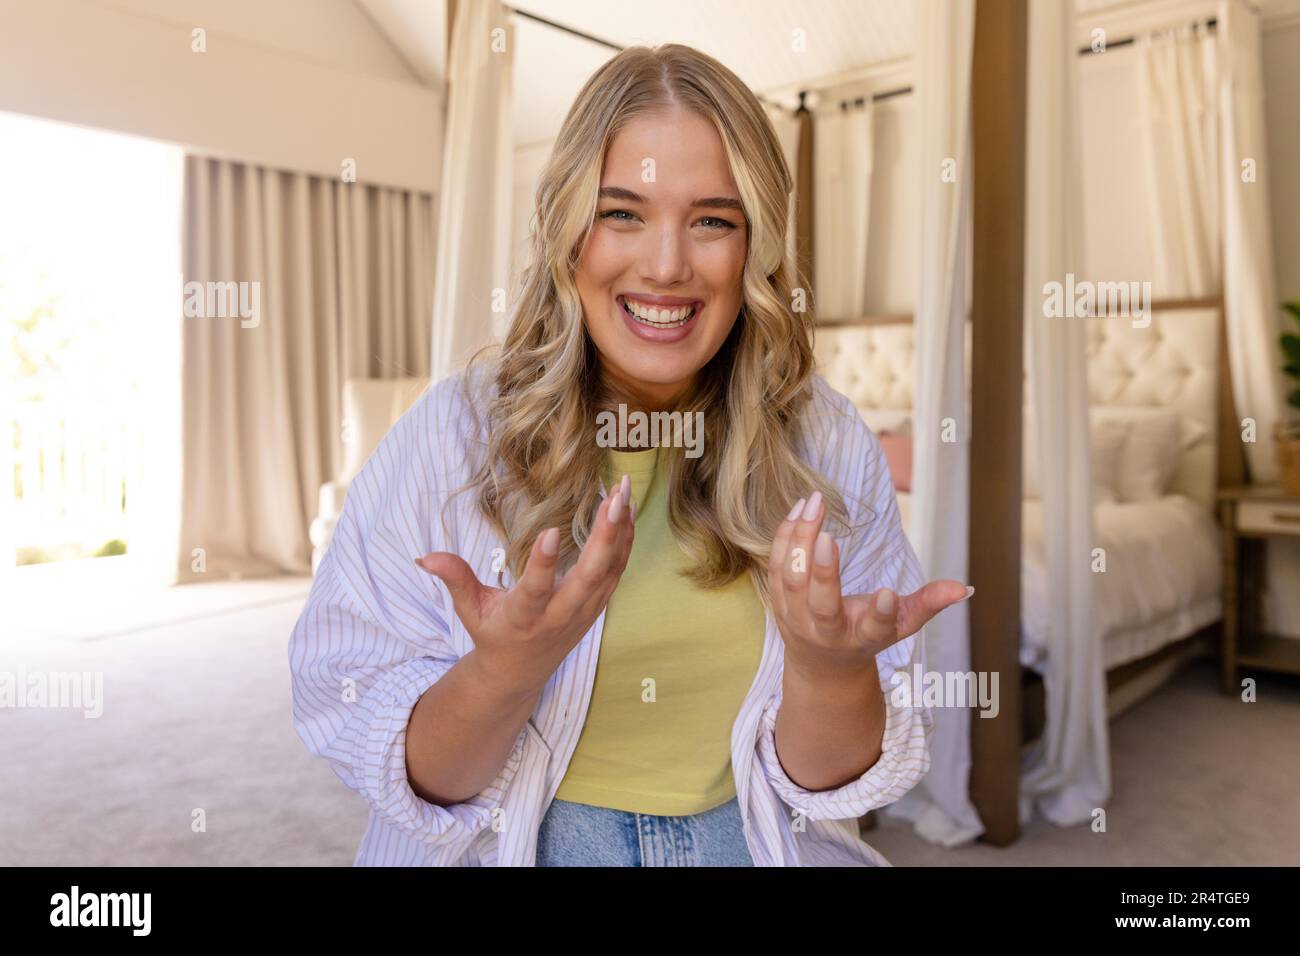 Blonde plus size caucasian young woman gesturing and looking at camera while sitting in bedroom Stock Photo